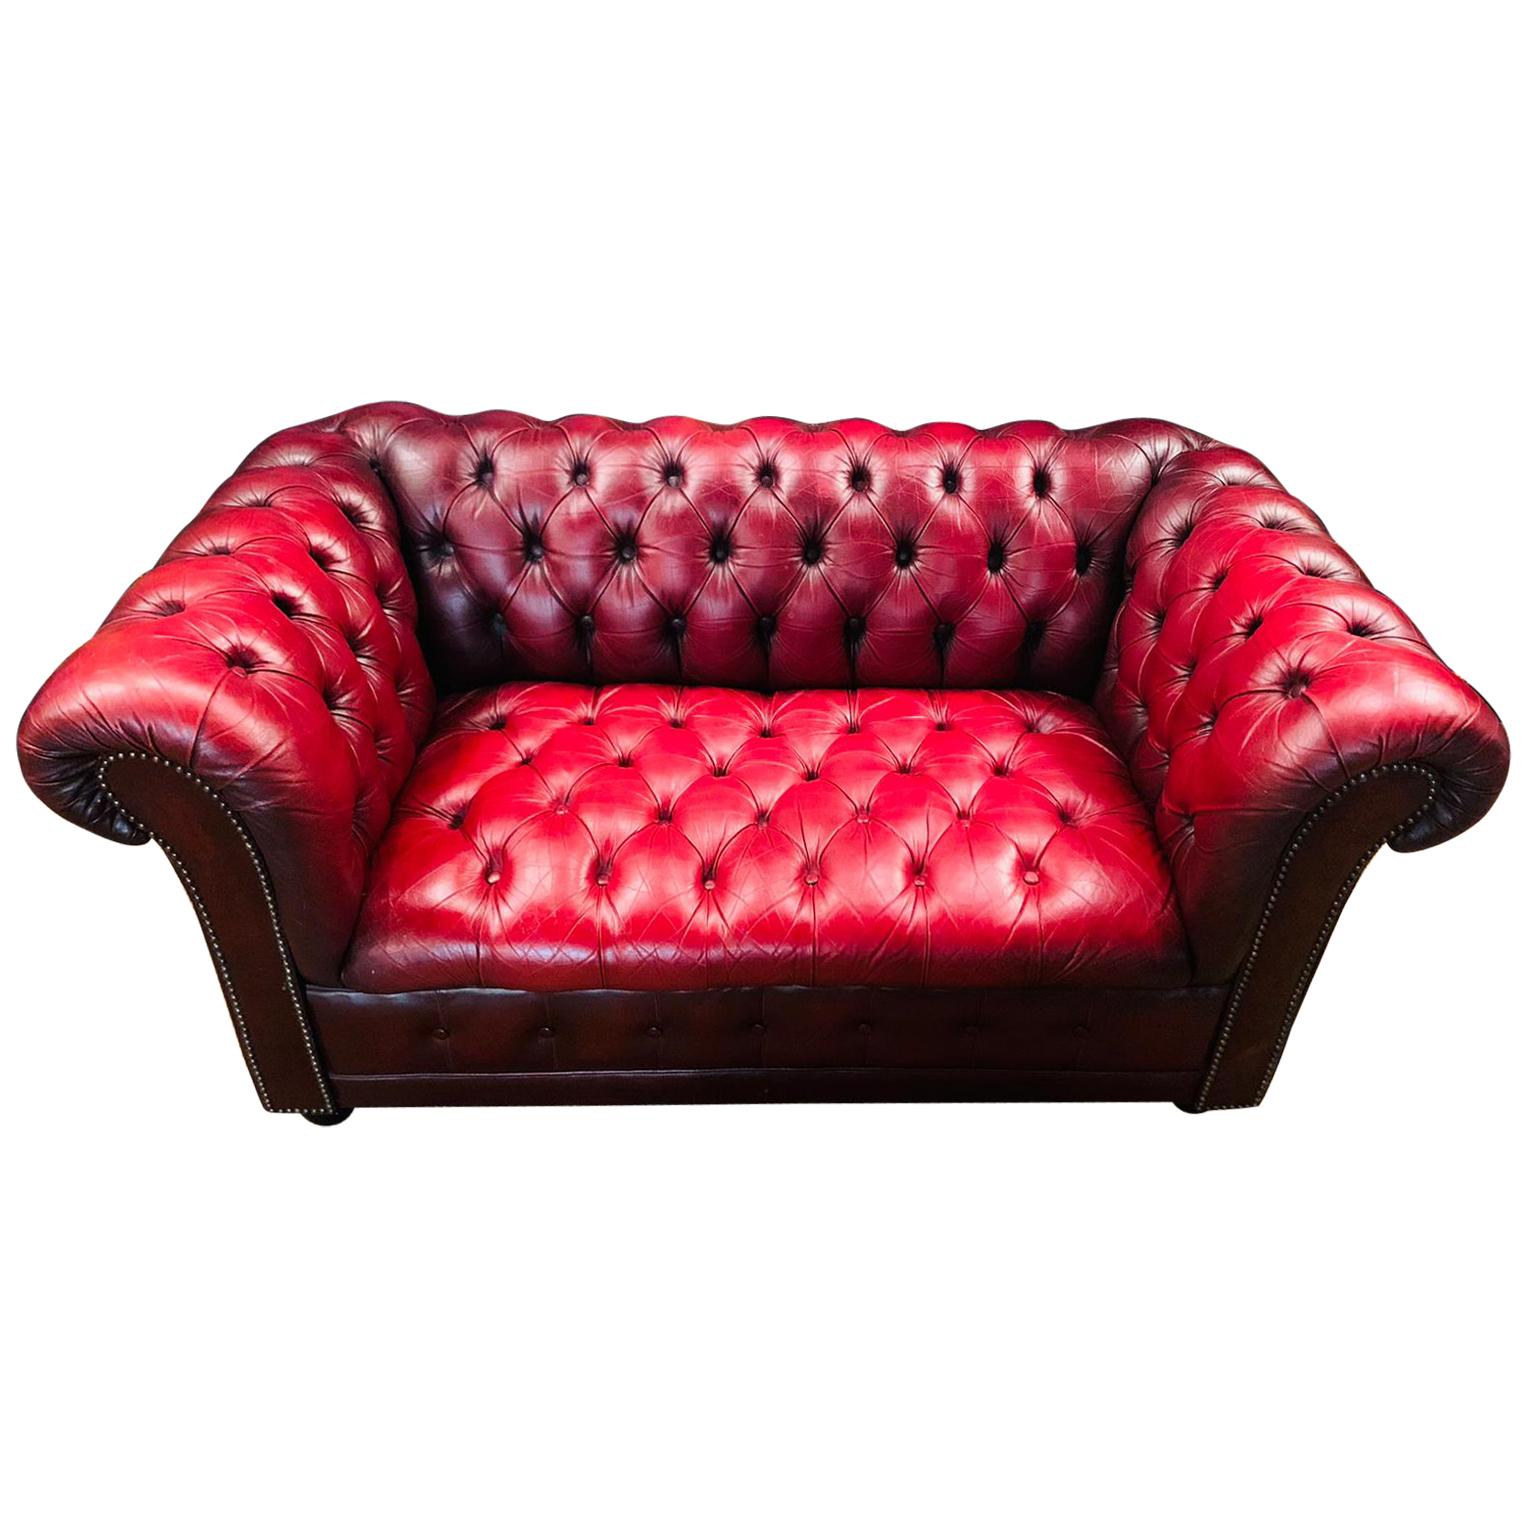 Stunning Vintage English Red Leather Chesterfield Sofa Made by Pendragon